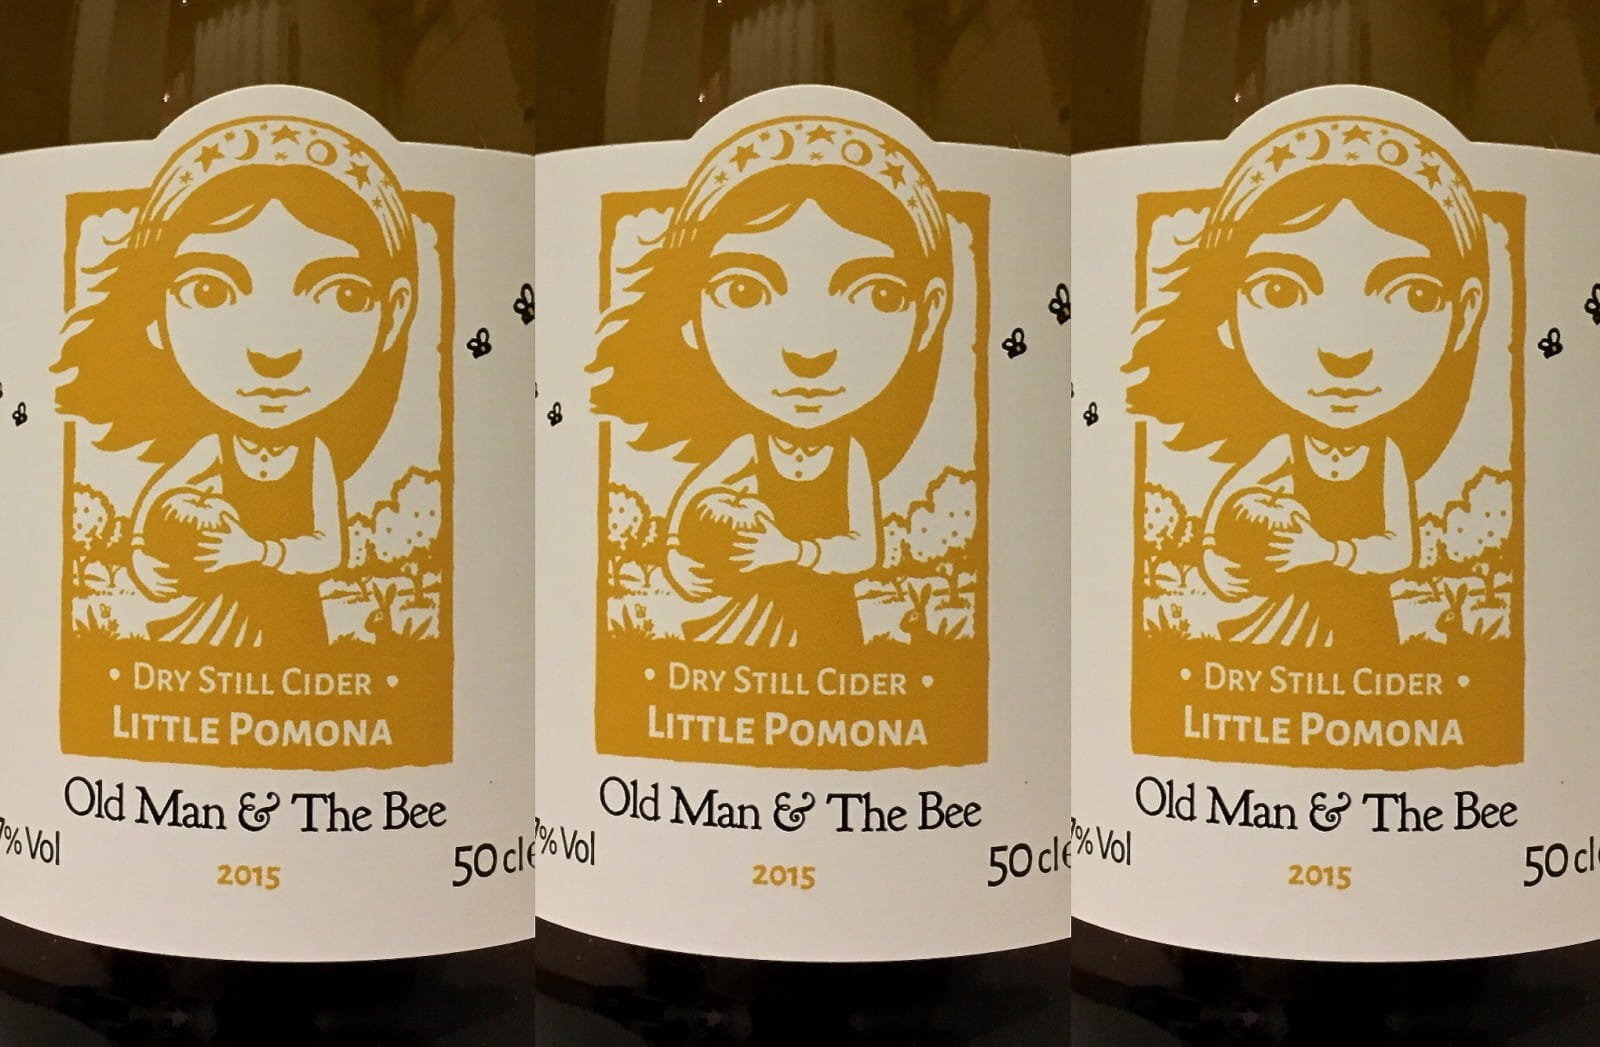  Little Pomona Old Man & The Bee: an exciting new cider